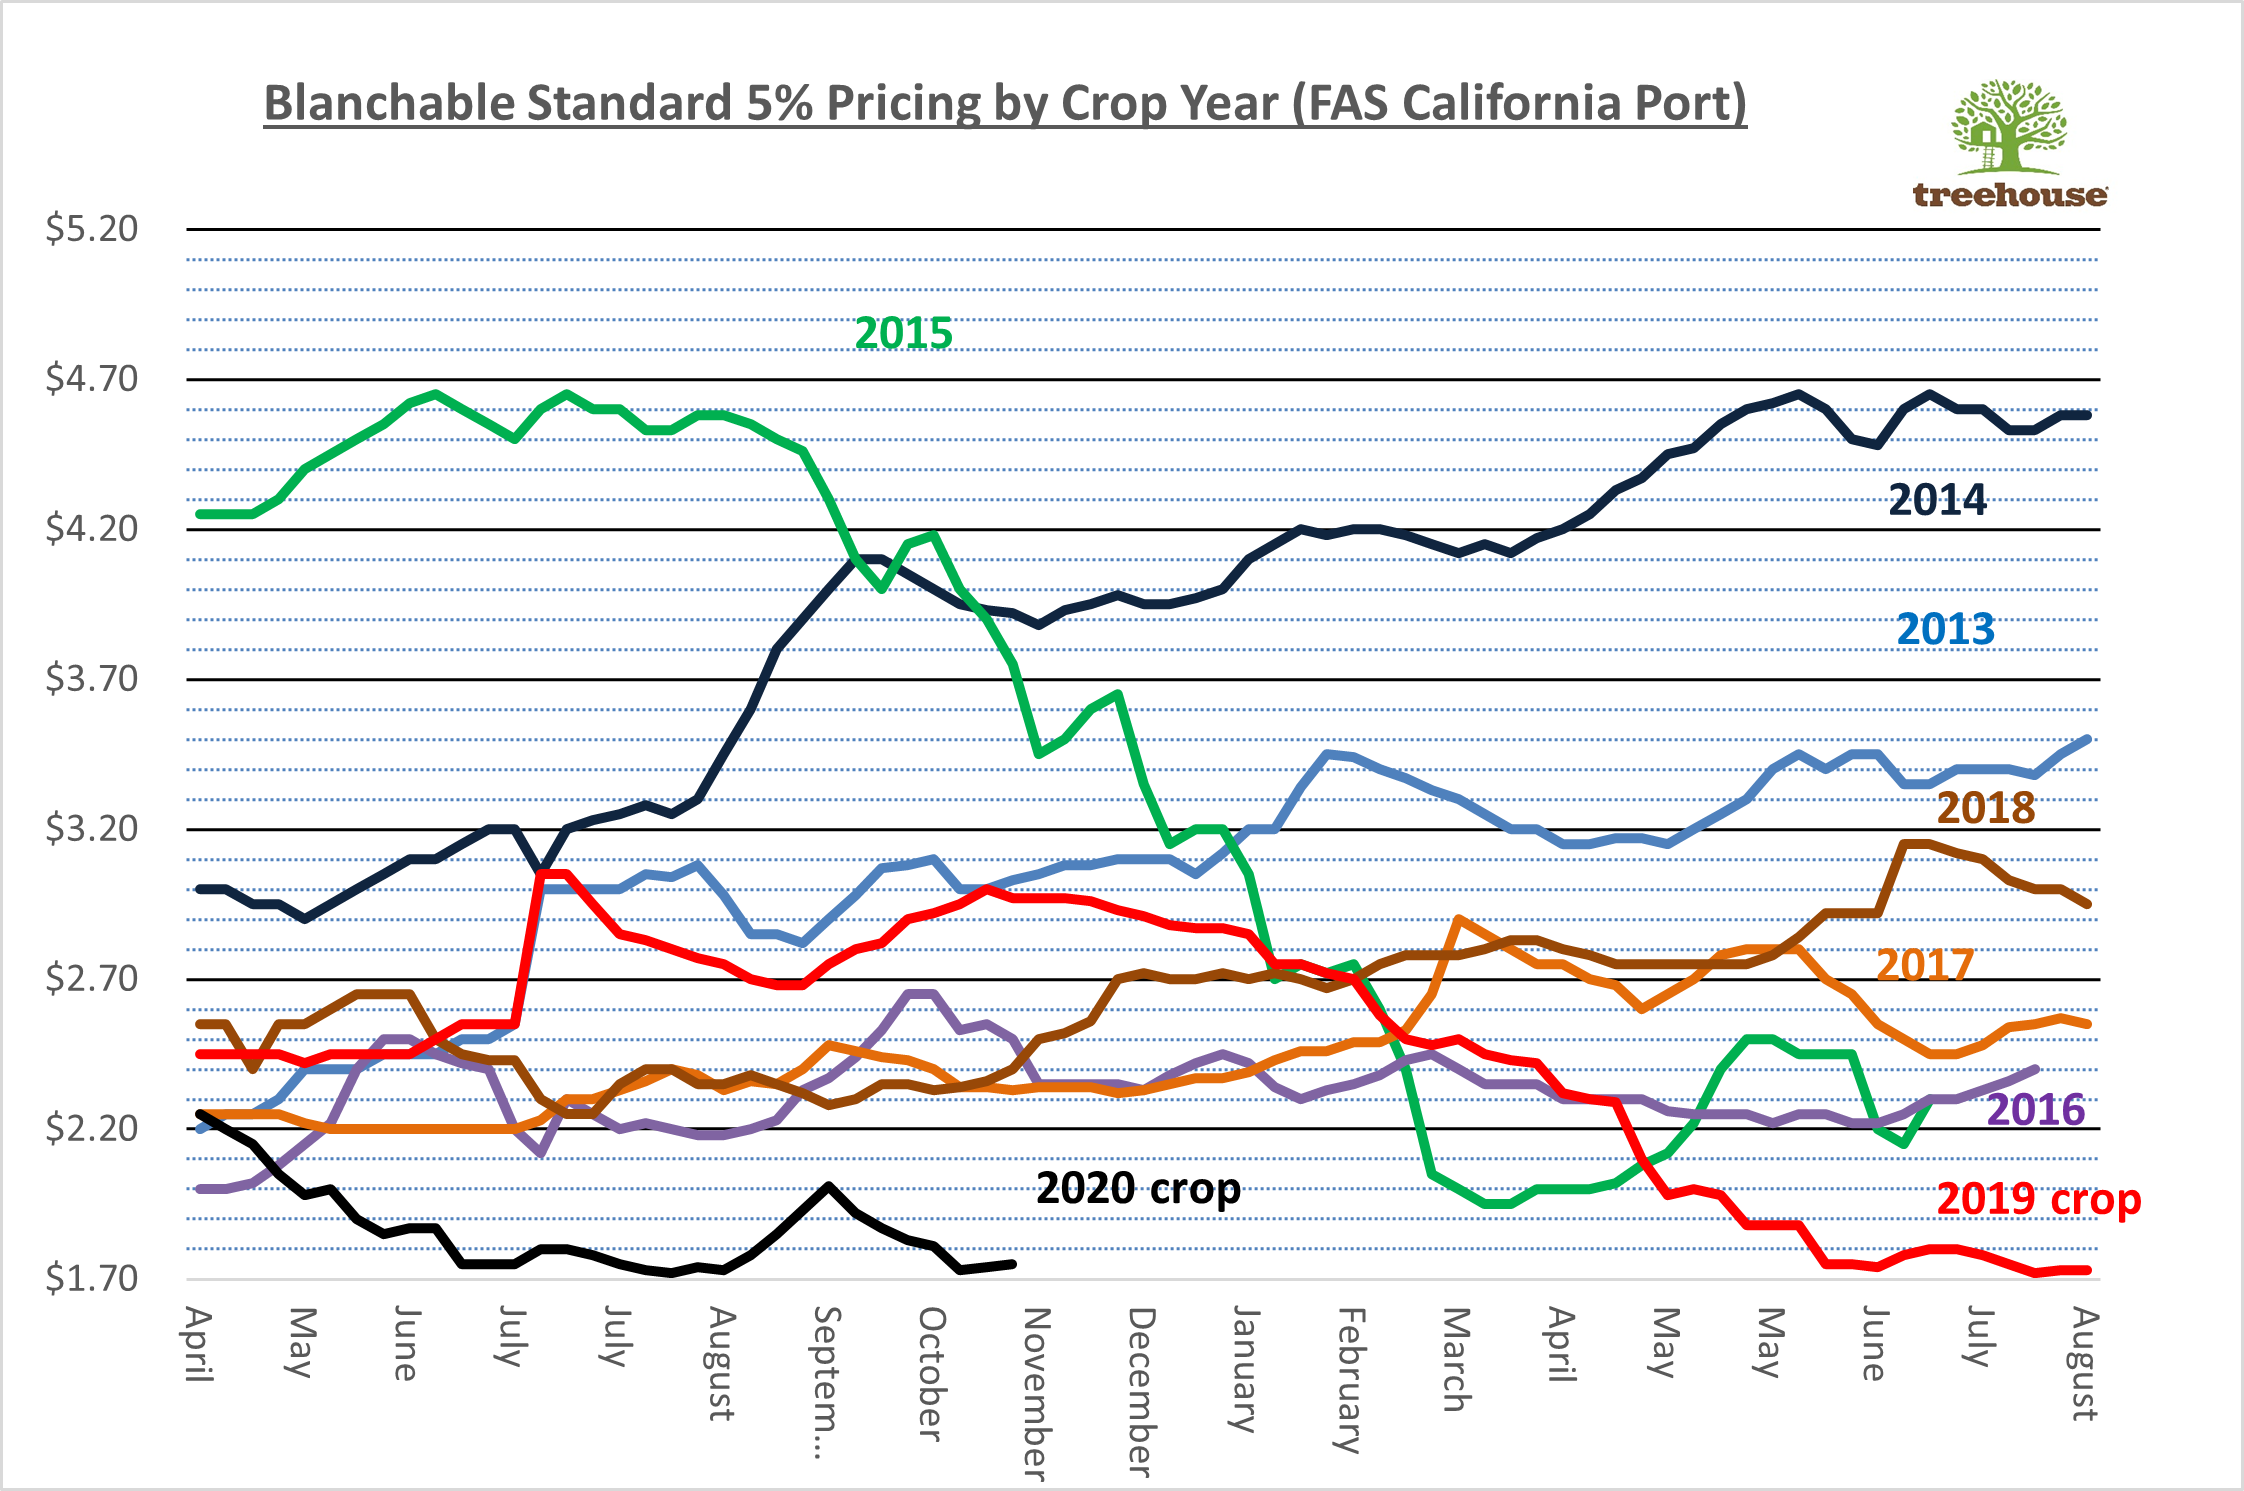 Blanchable Standart 5% Pricing by Crop Year (FAS California Port)